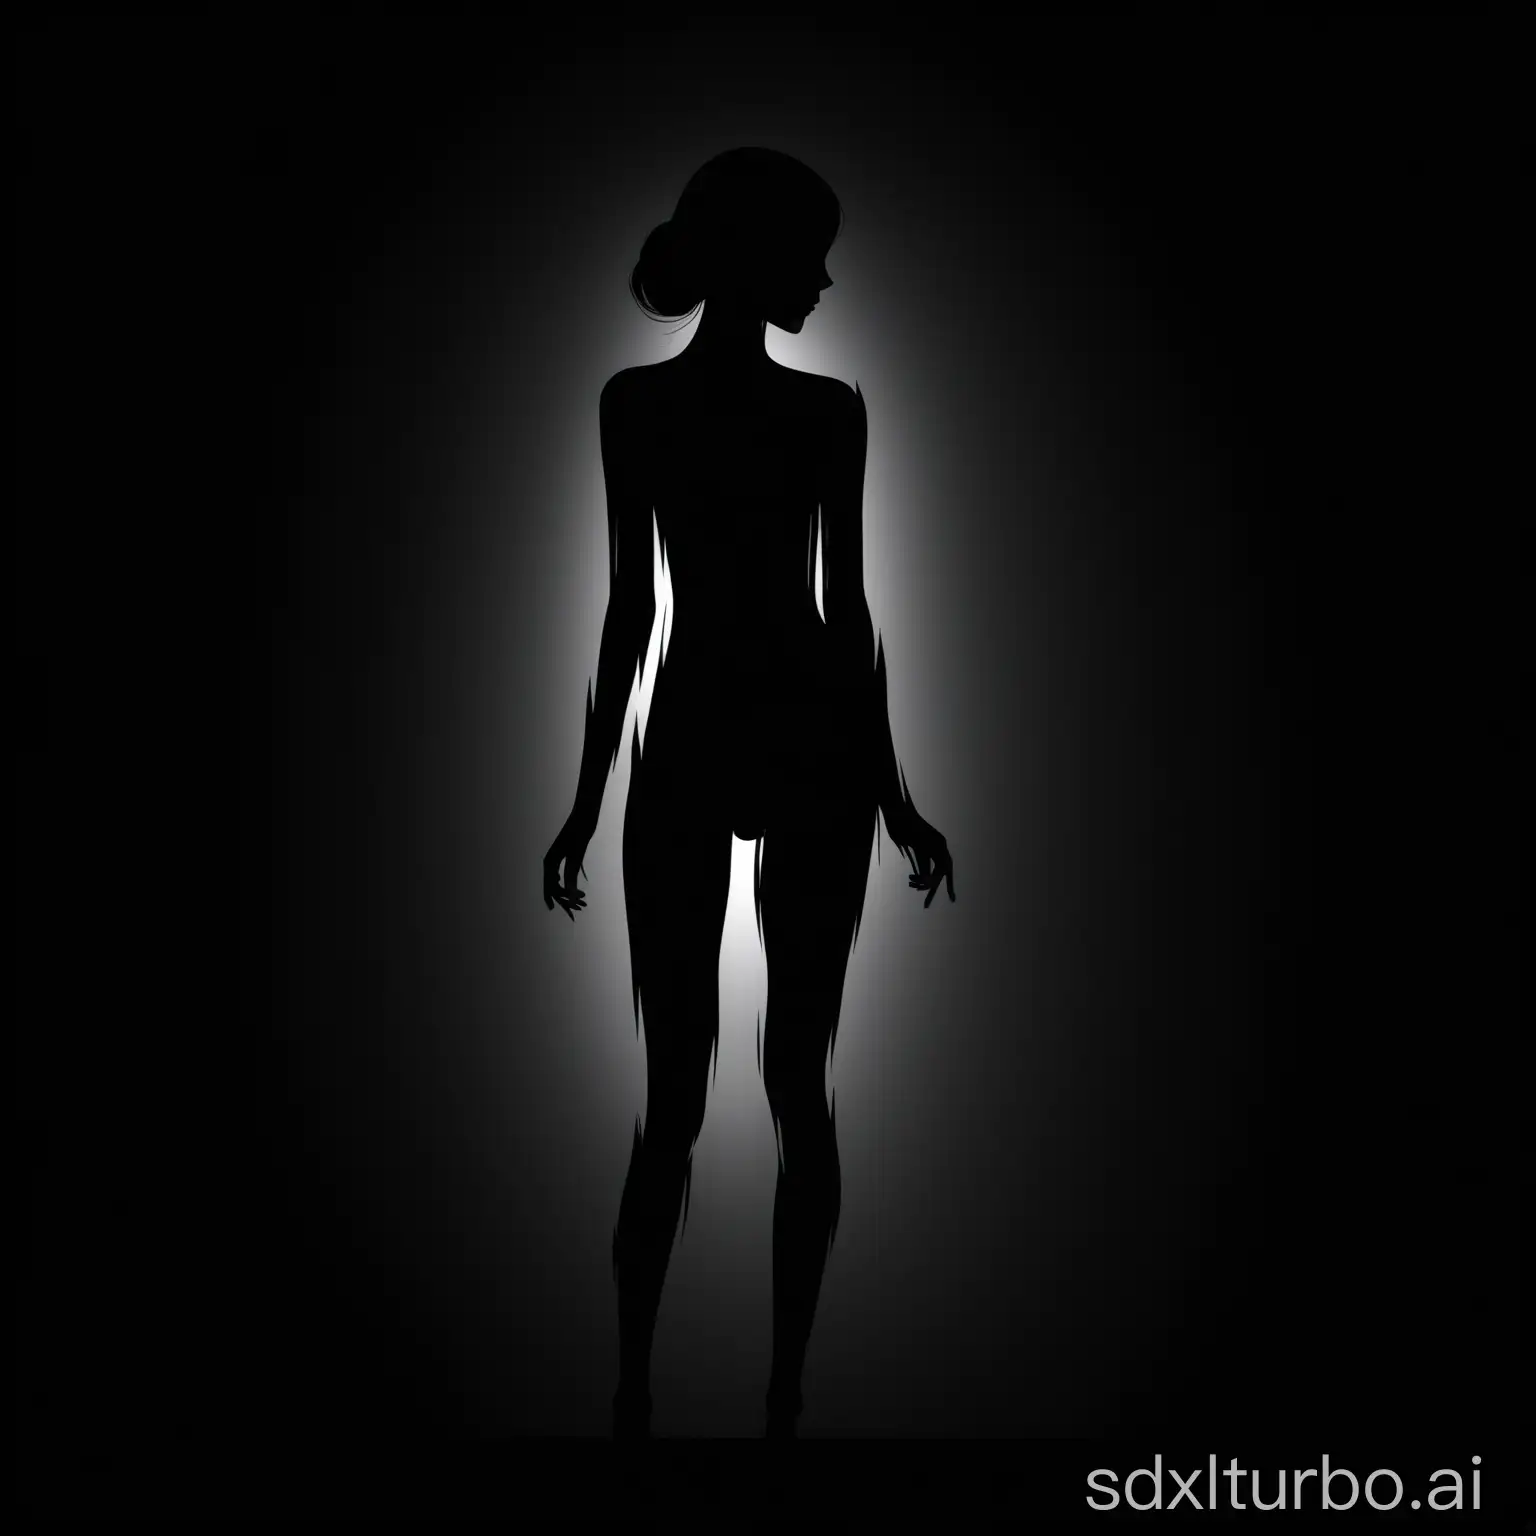 Elegant-Silhouette-of-a-Woman-Against-a-Stark-Black-Background